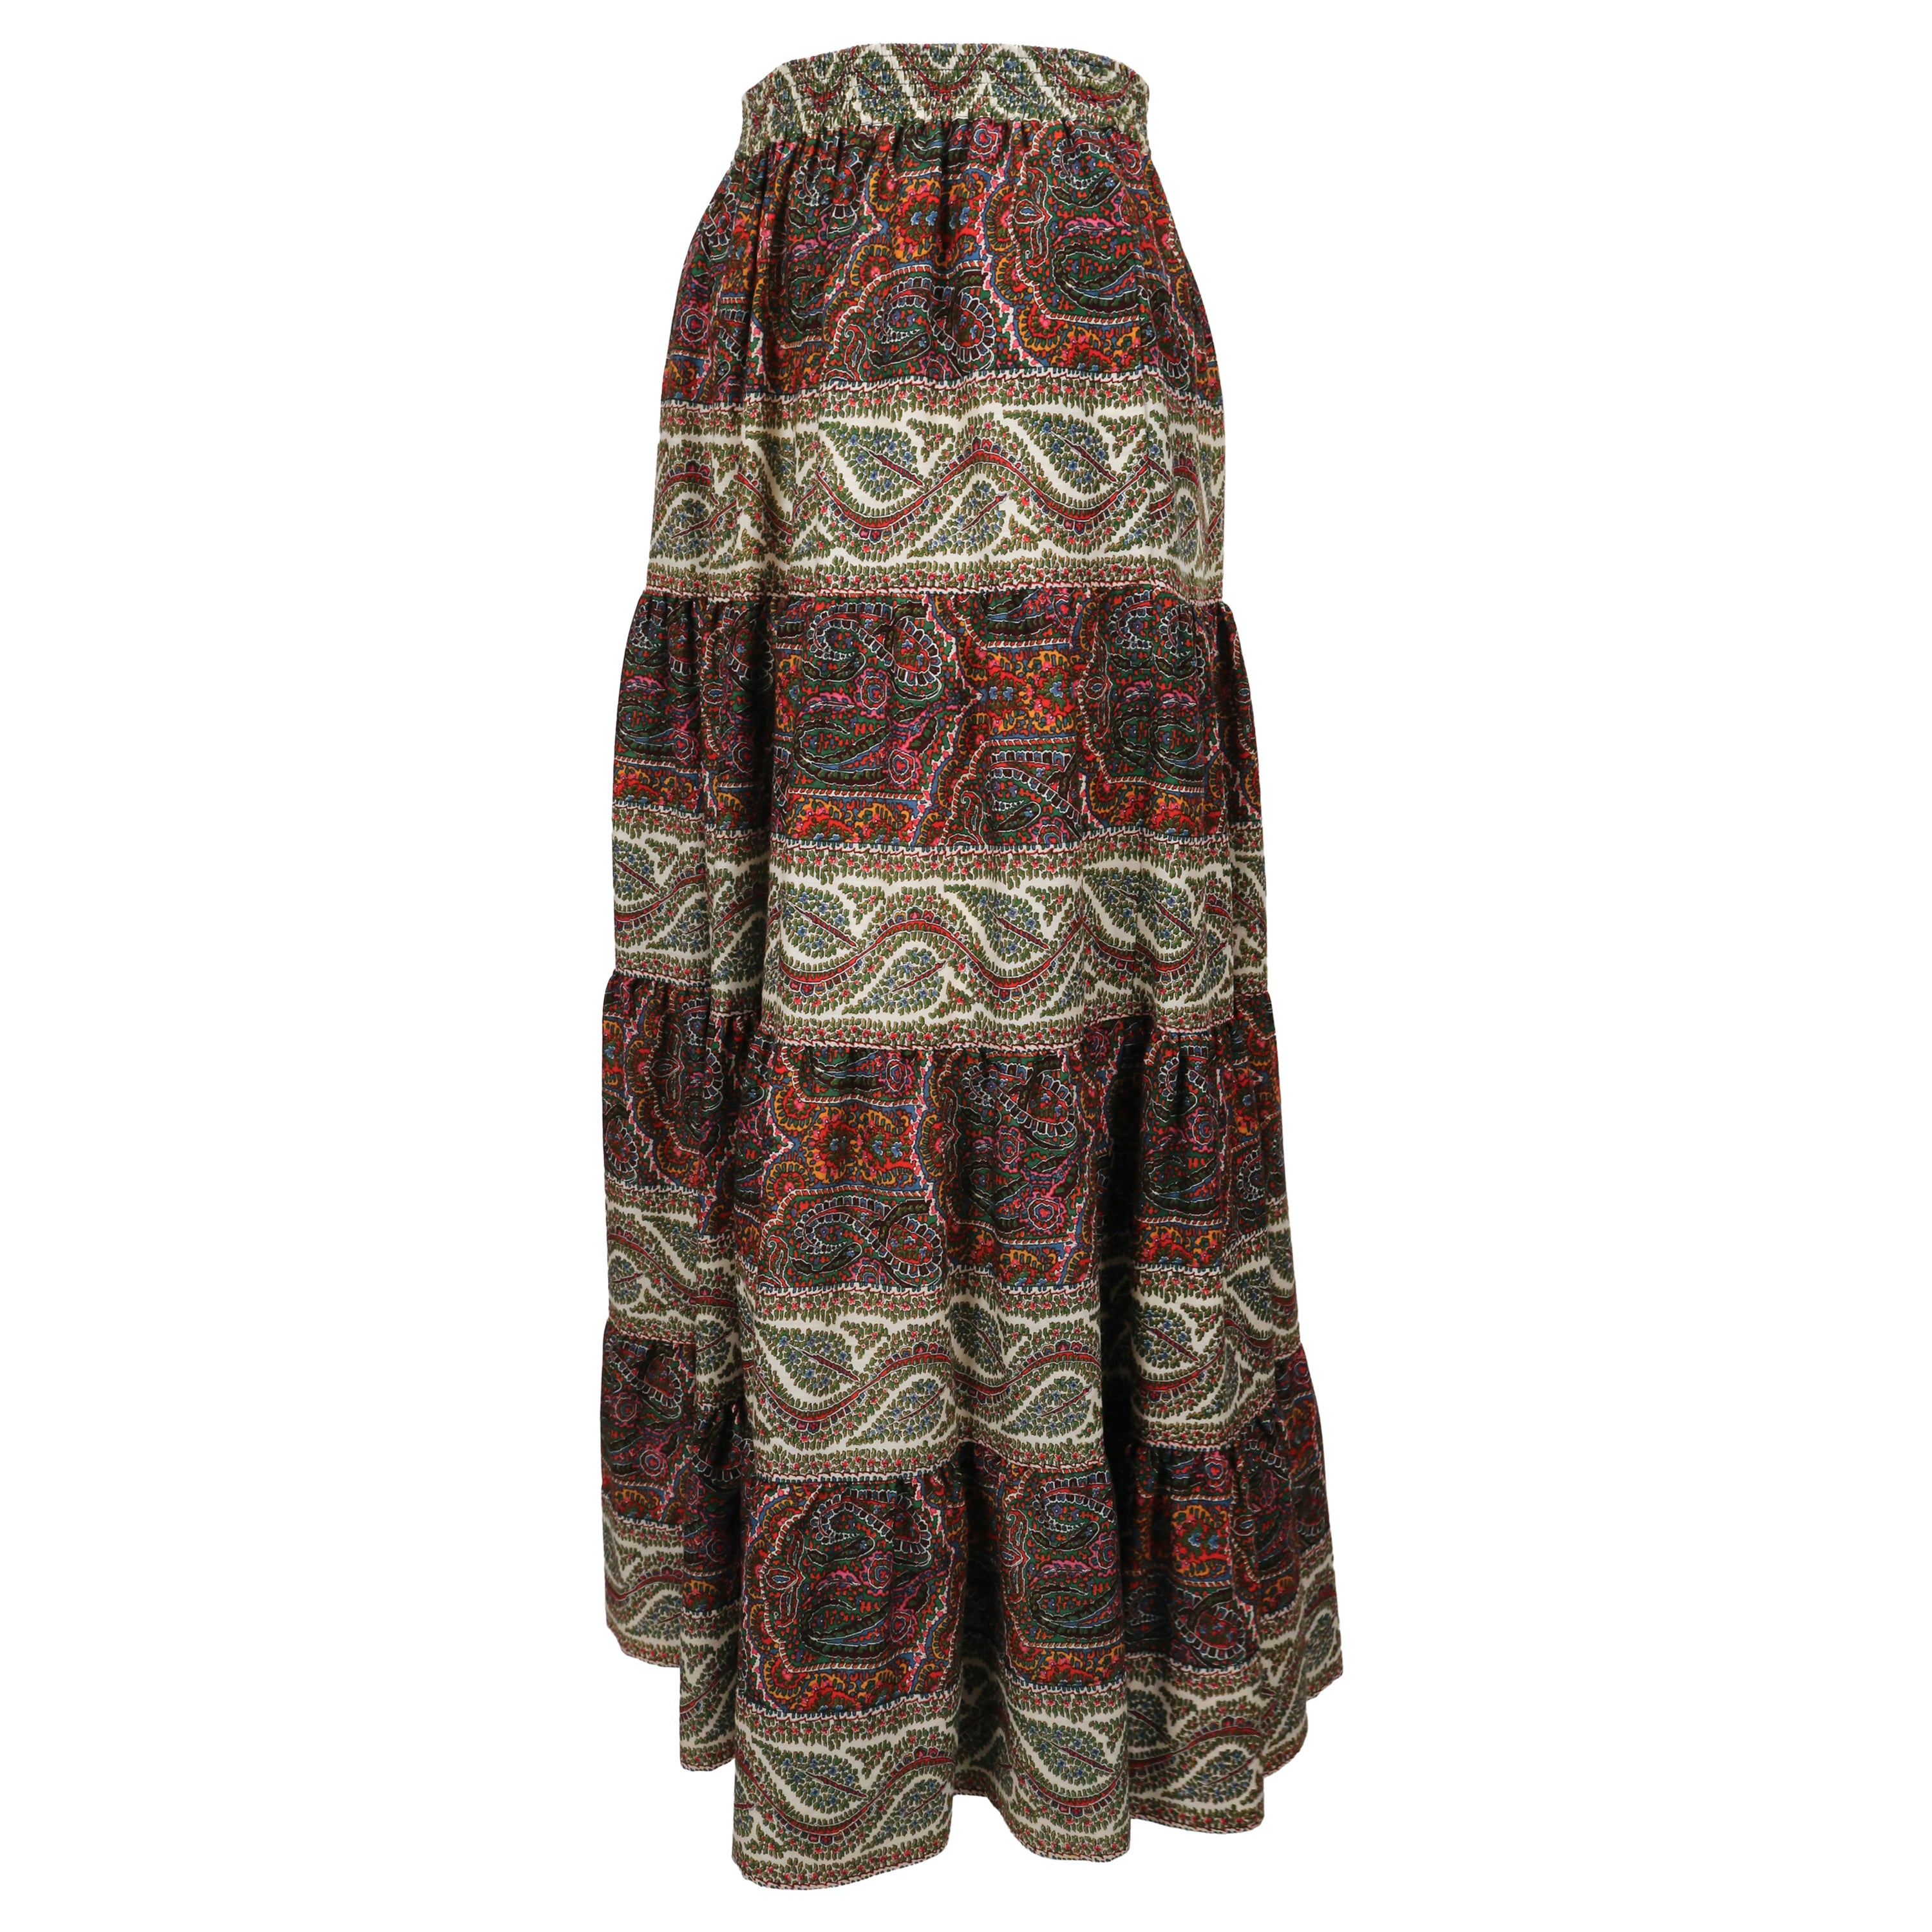 1977 YVES SAINT LAURENT tiered floral paisley skirt For Sale